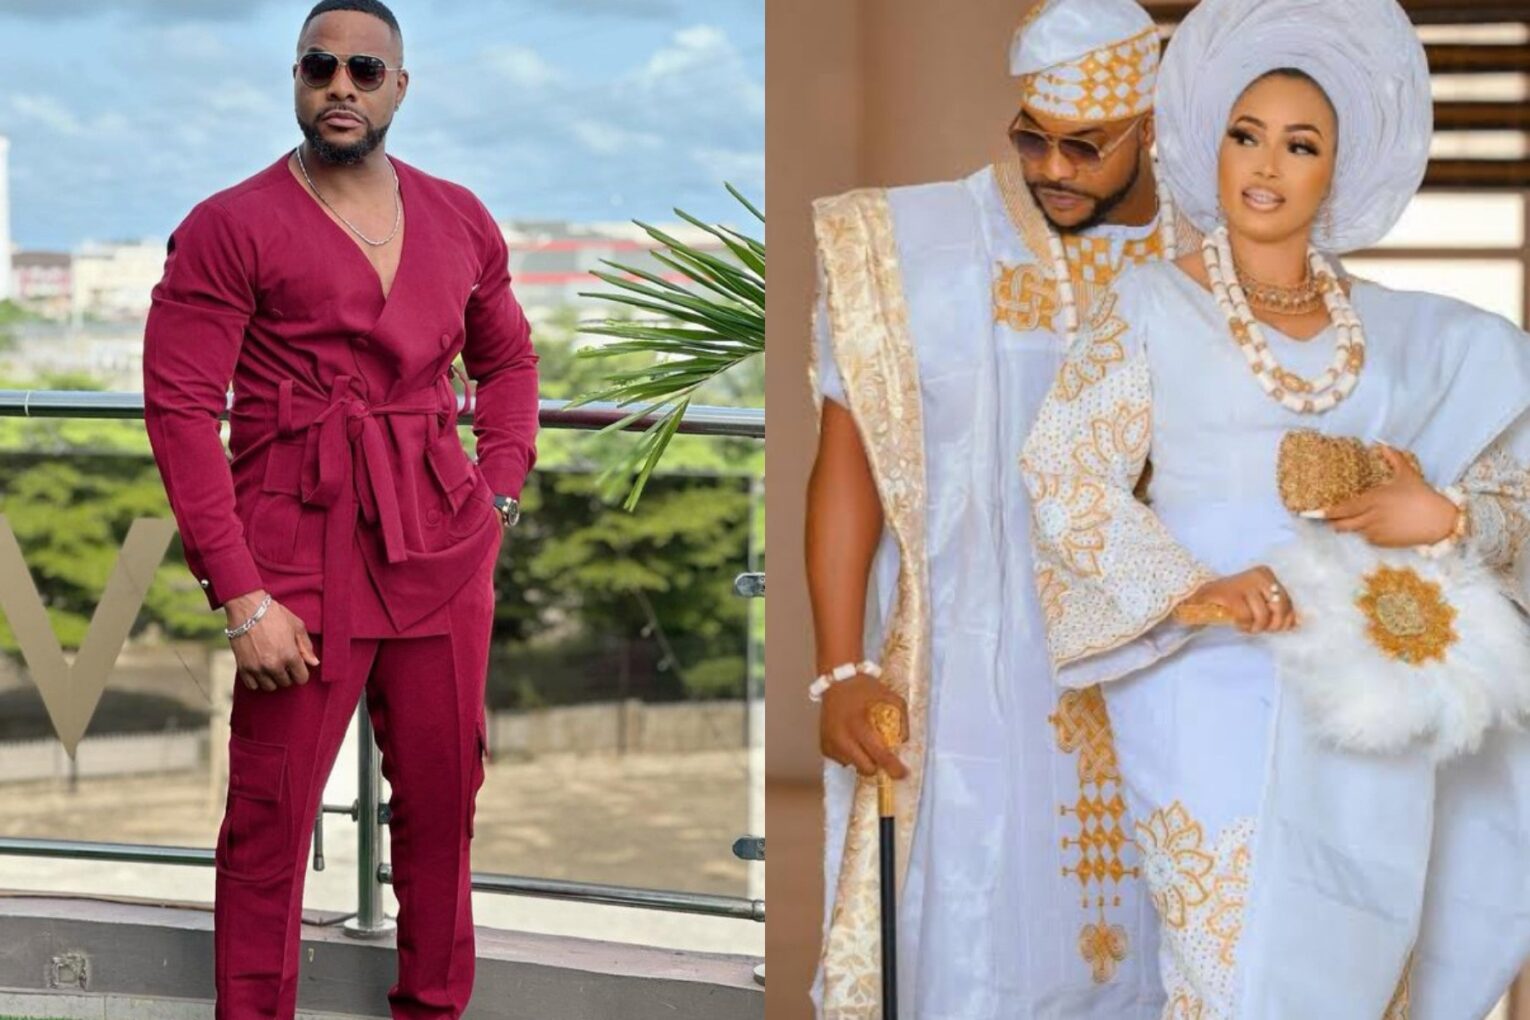 Nollywood actor Bolanle Ninalowo announces split from wife - Daily Post Nigeria